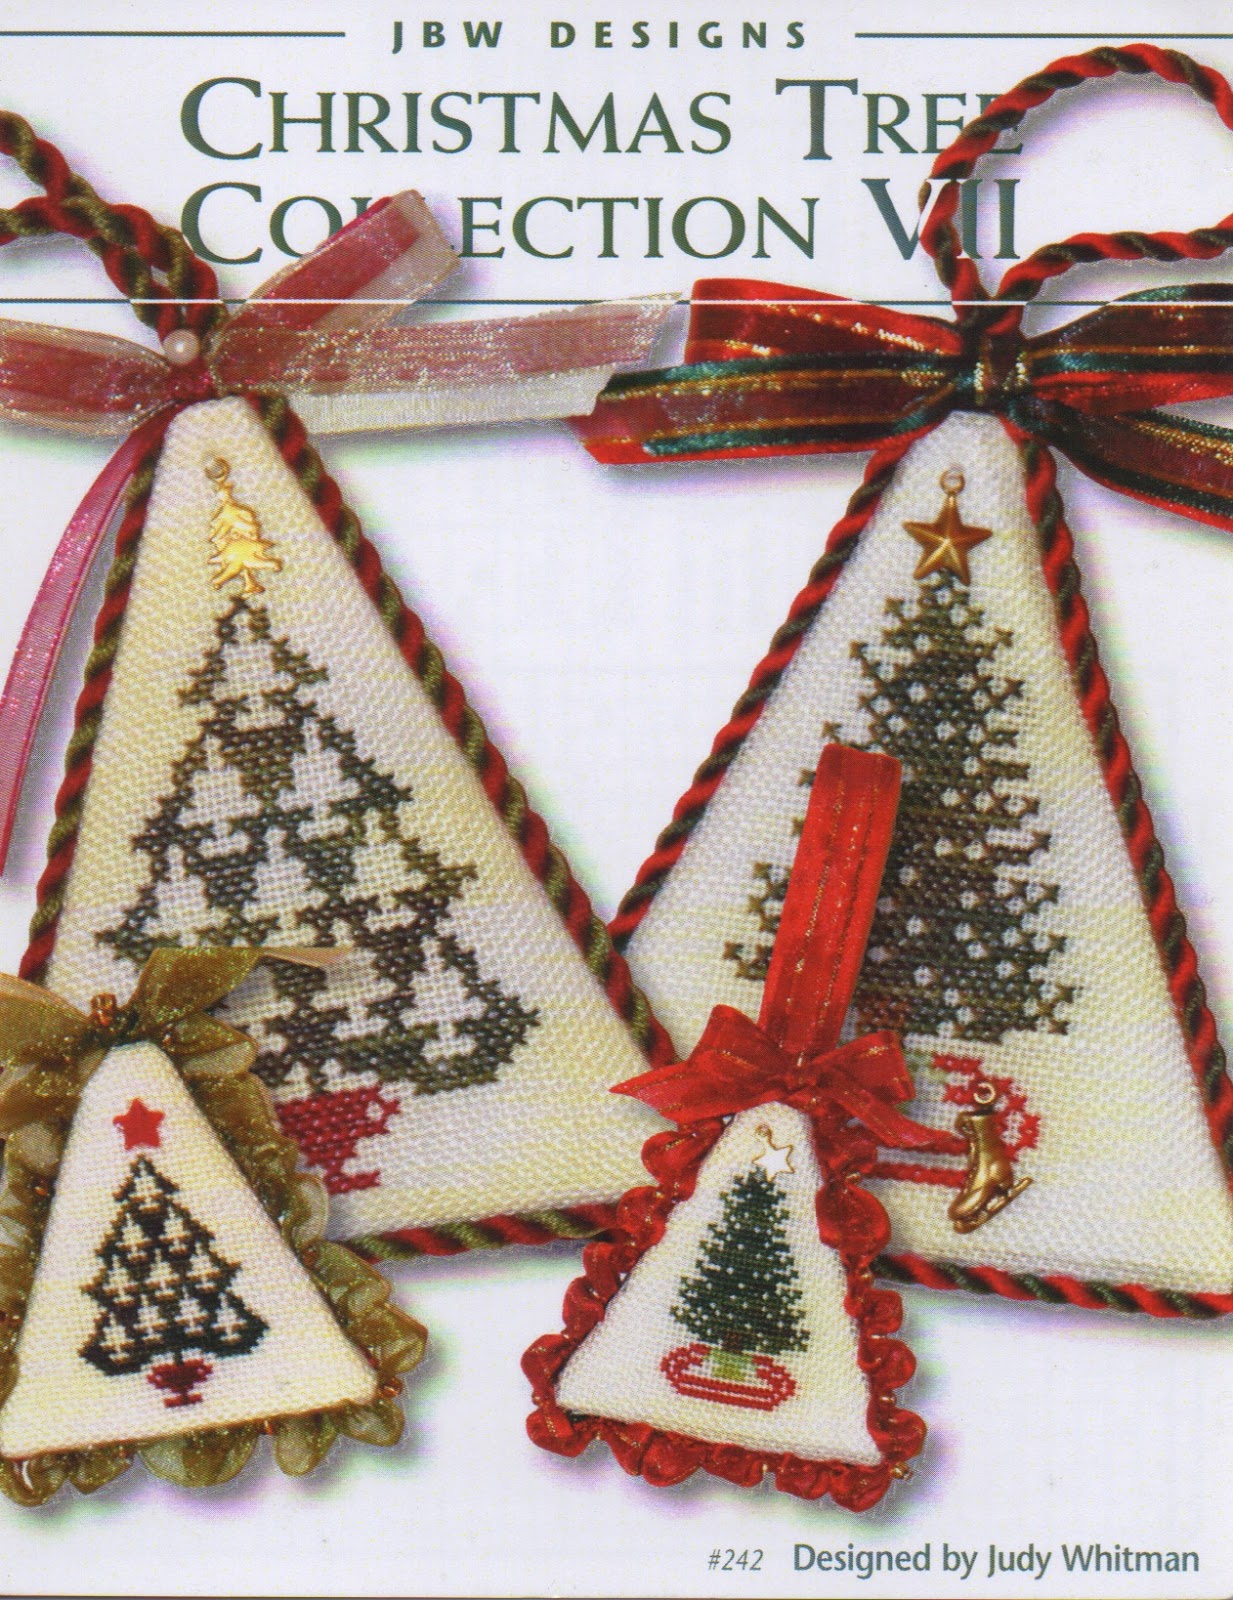 #242Christmas Tree Collection VII  by JBW Designs